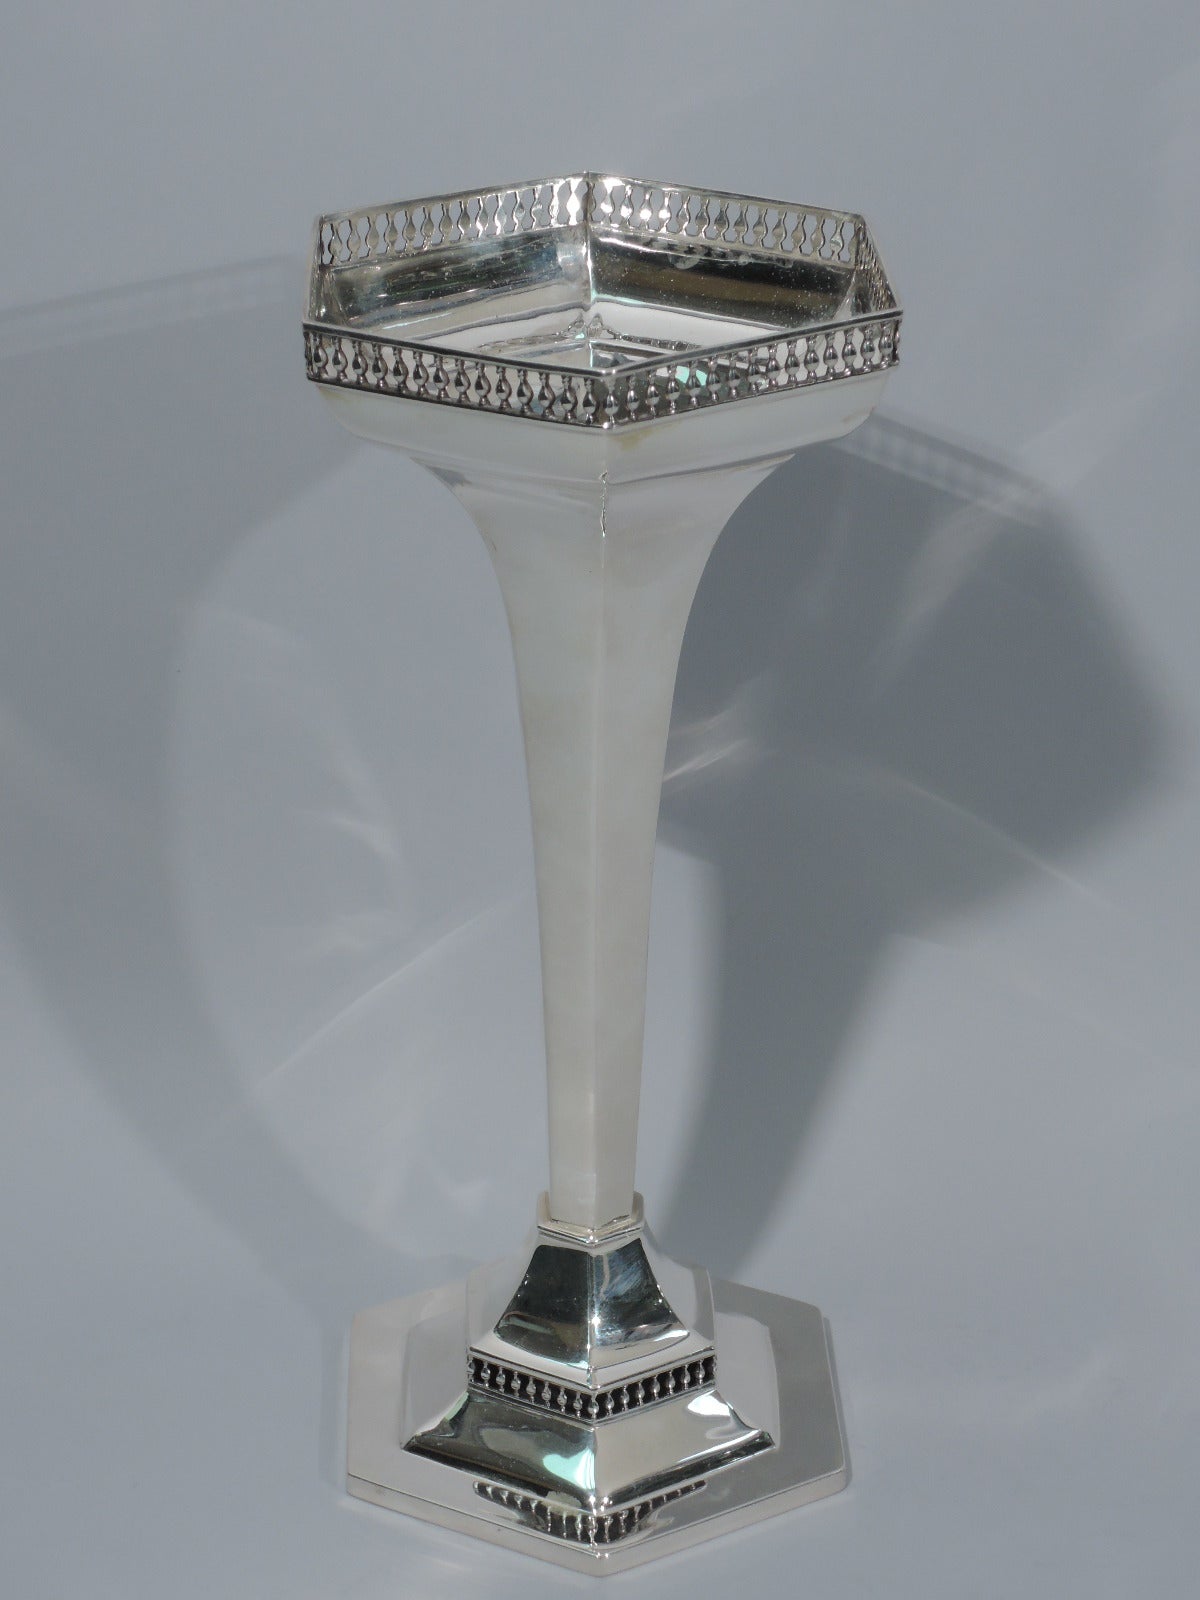 Early 20th Century English Modern Design - Art Deco Sterling Silver Vase by Walker & Hall